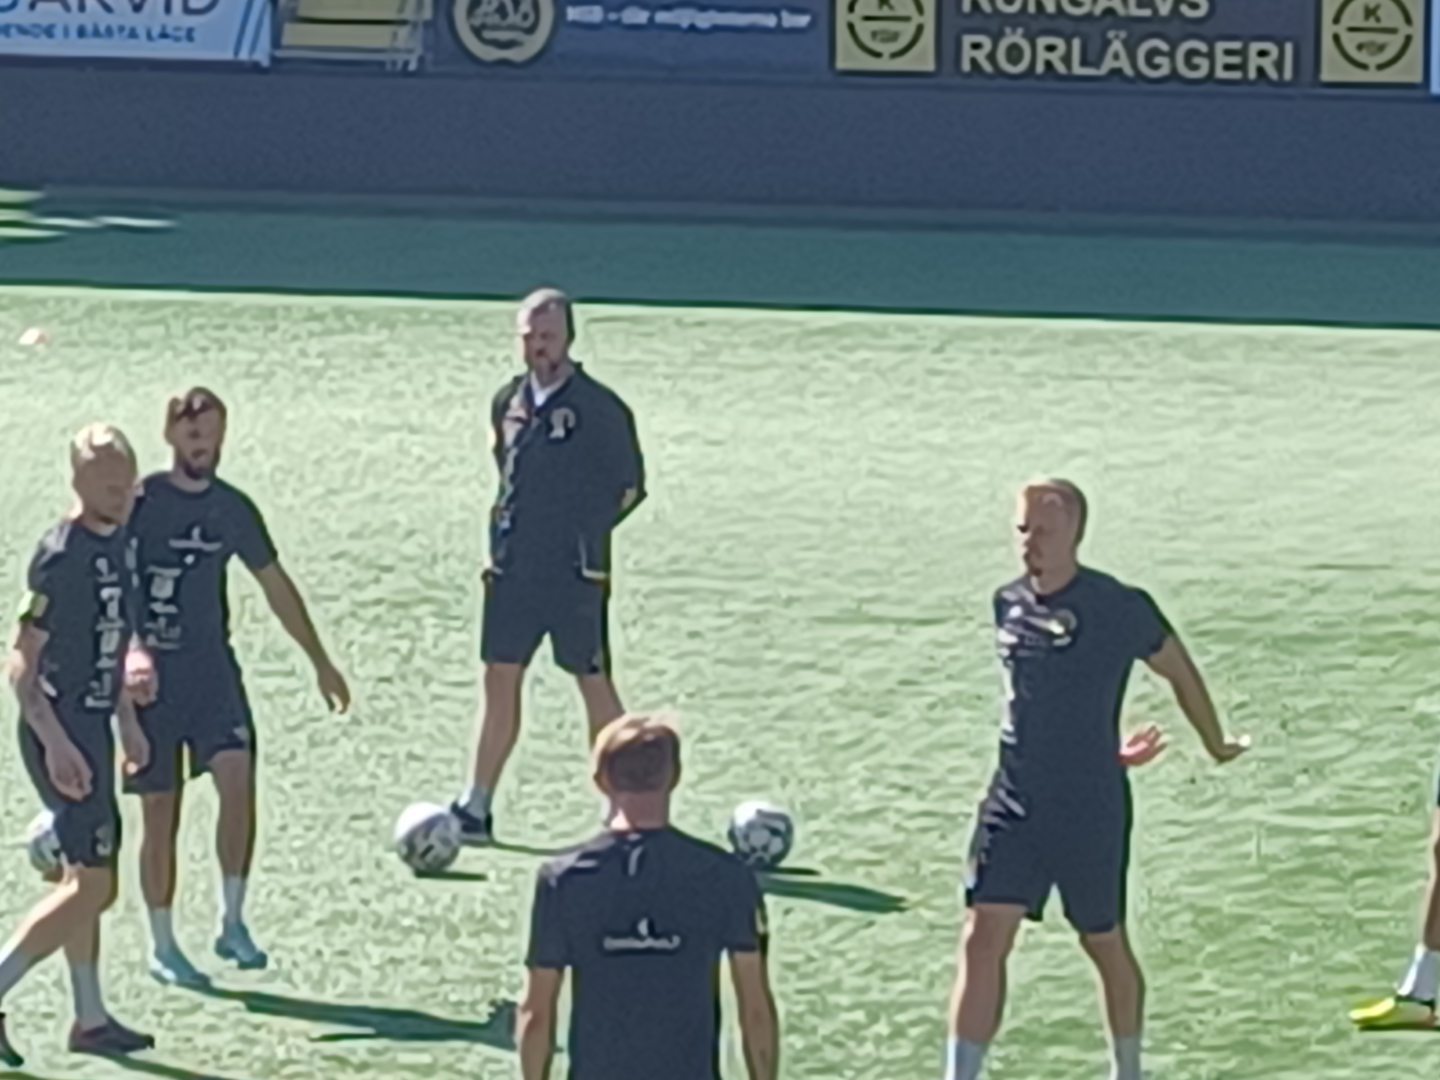  New Aberdeen manager Jimmy Thelin taking Elfsborg training at the Boras Arena, Sweden Image: DC Thomson 